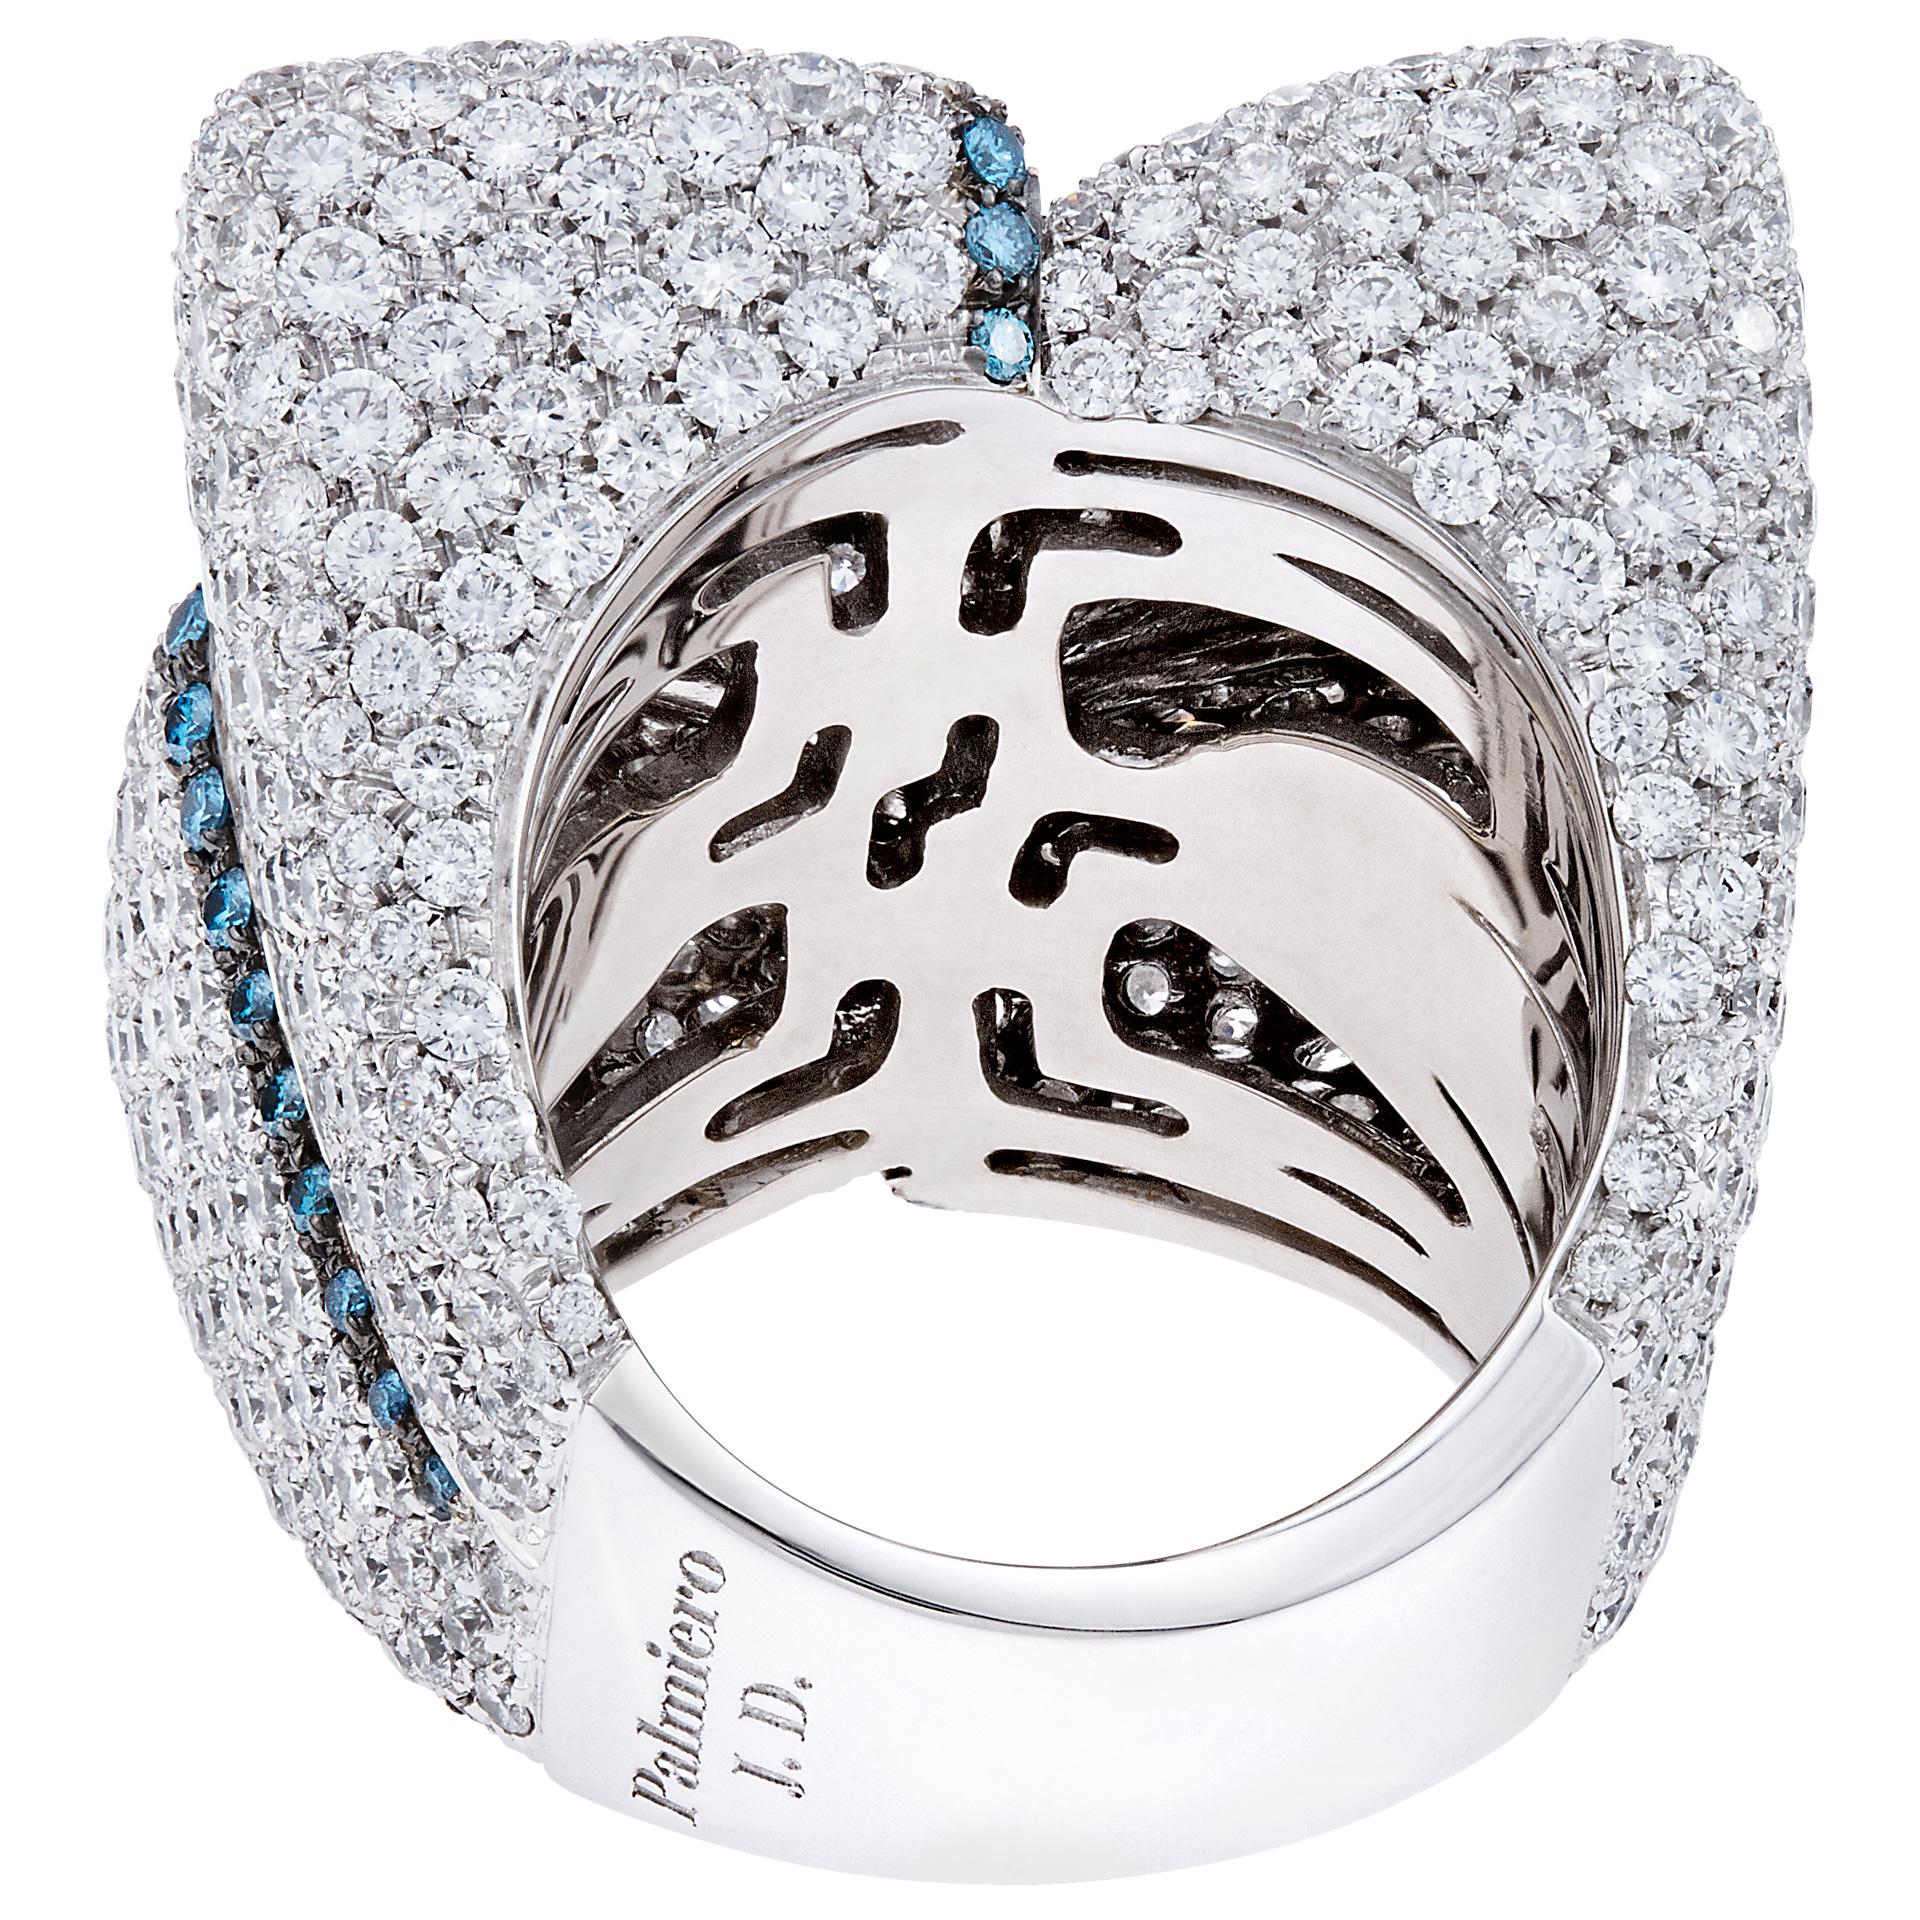 Palmiero J.D. Ladies Diamond 18k white gold ring In Excellent Condition For Sale In Surfside, FL